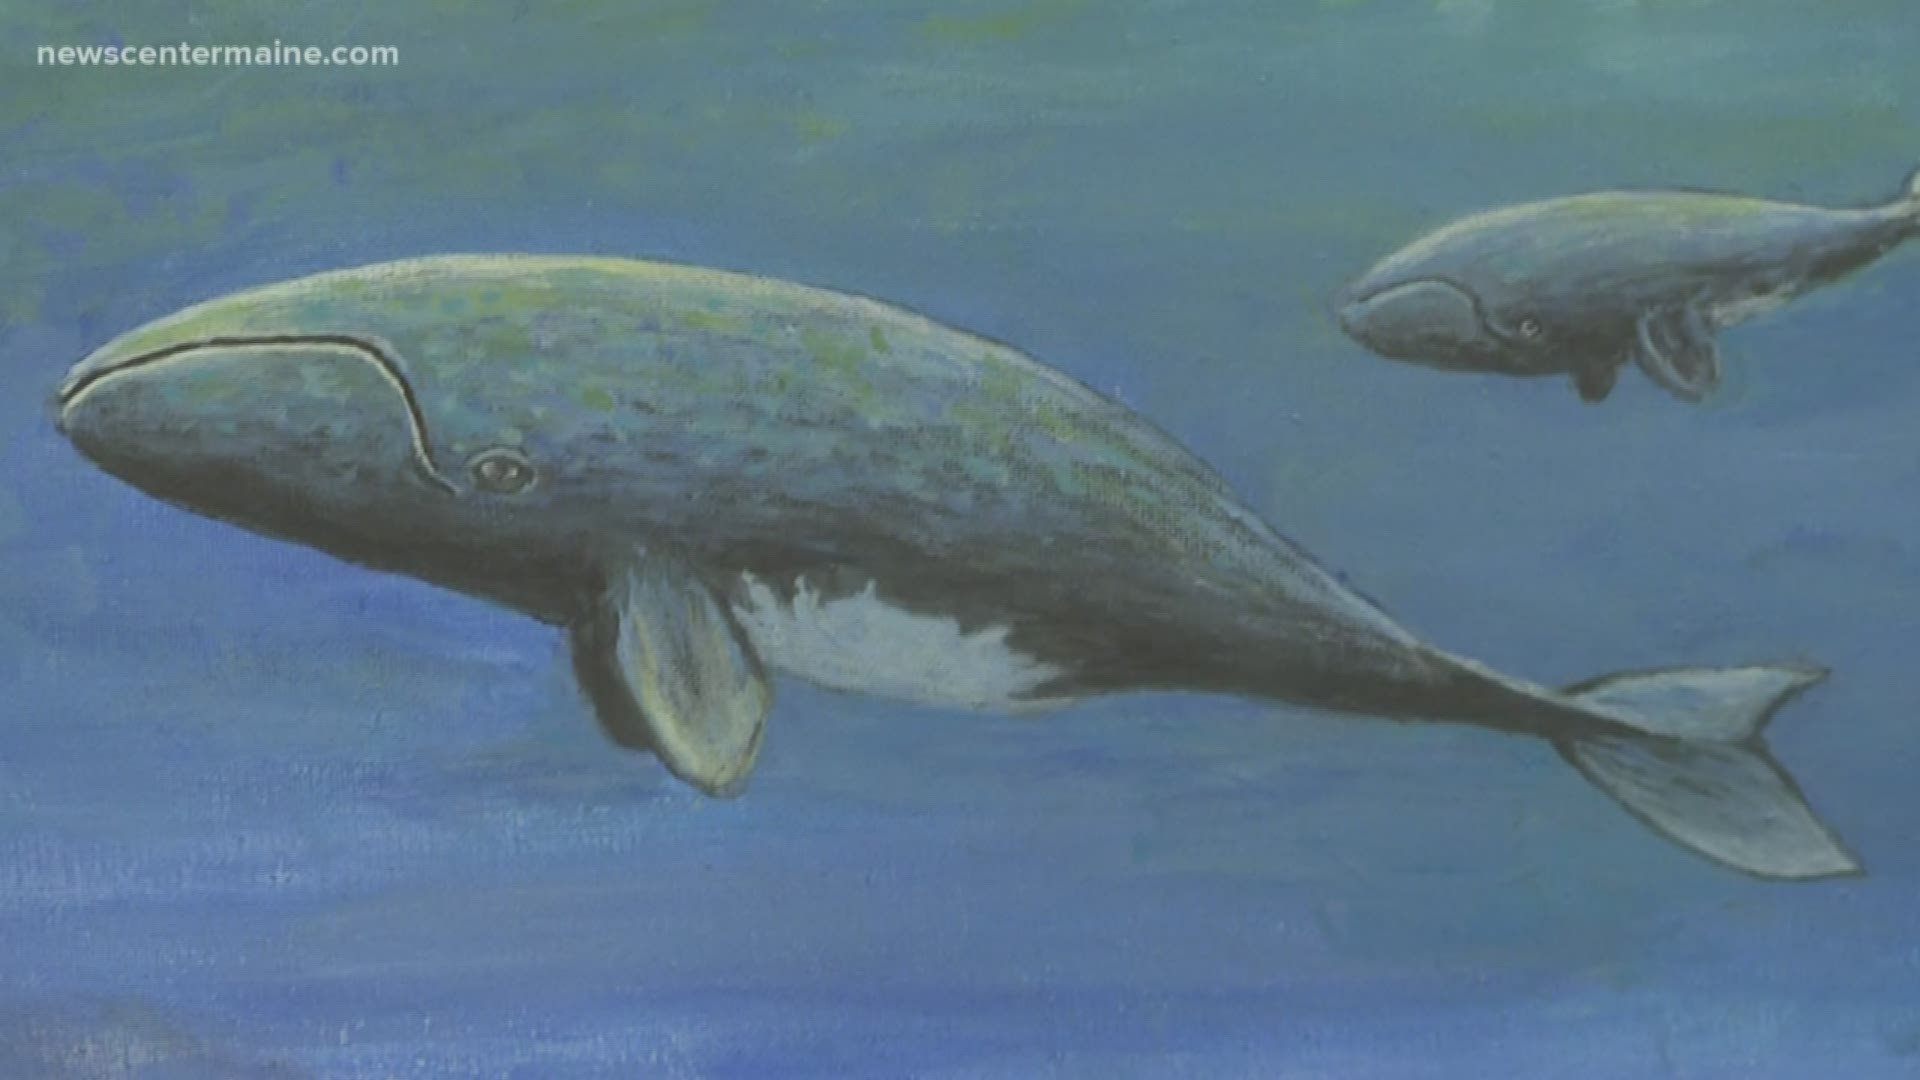 Local artists, environmental advocates, and researchers got together to educate the public about right whale migration along Maine's coast.